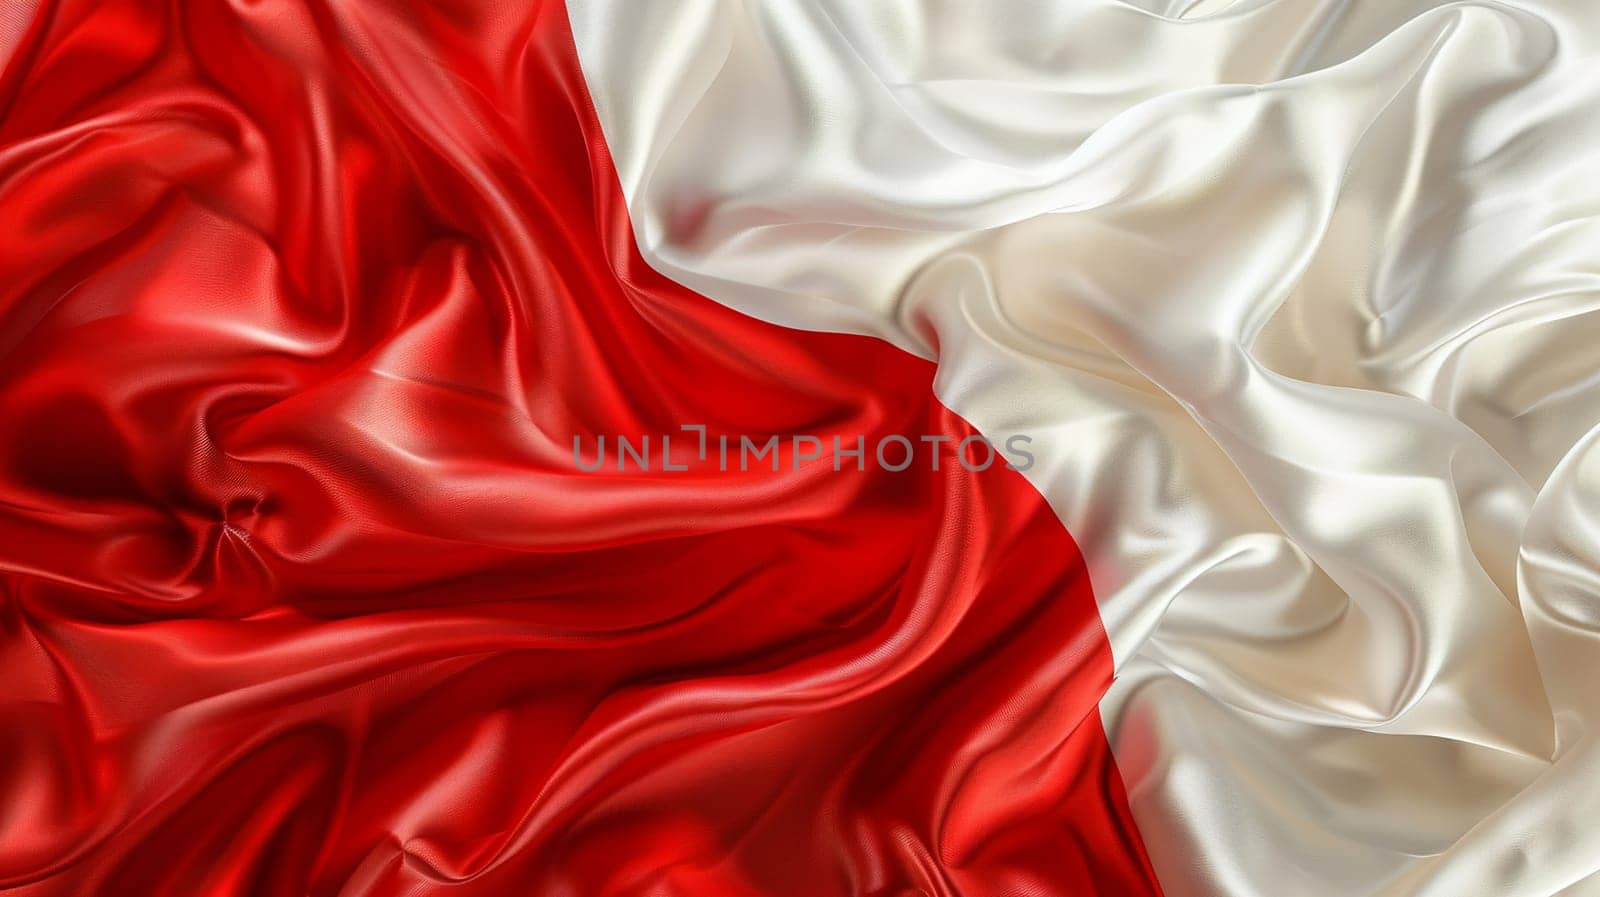 Silk fabric texture represents Poland flag, symbolizing national pride, elegance, and luxurious background